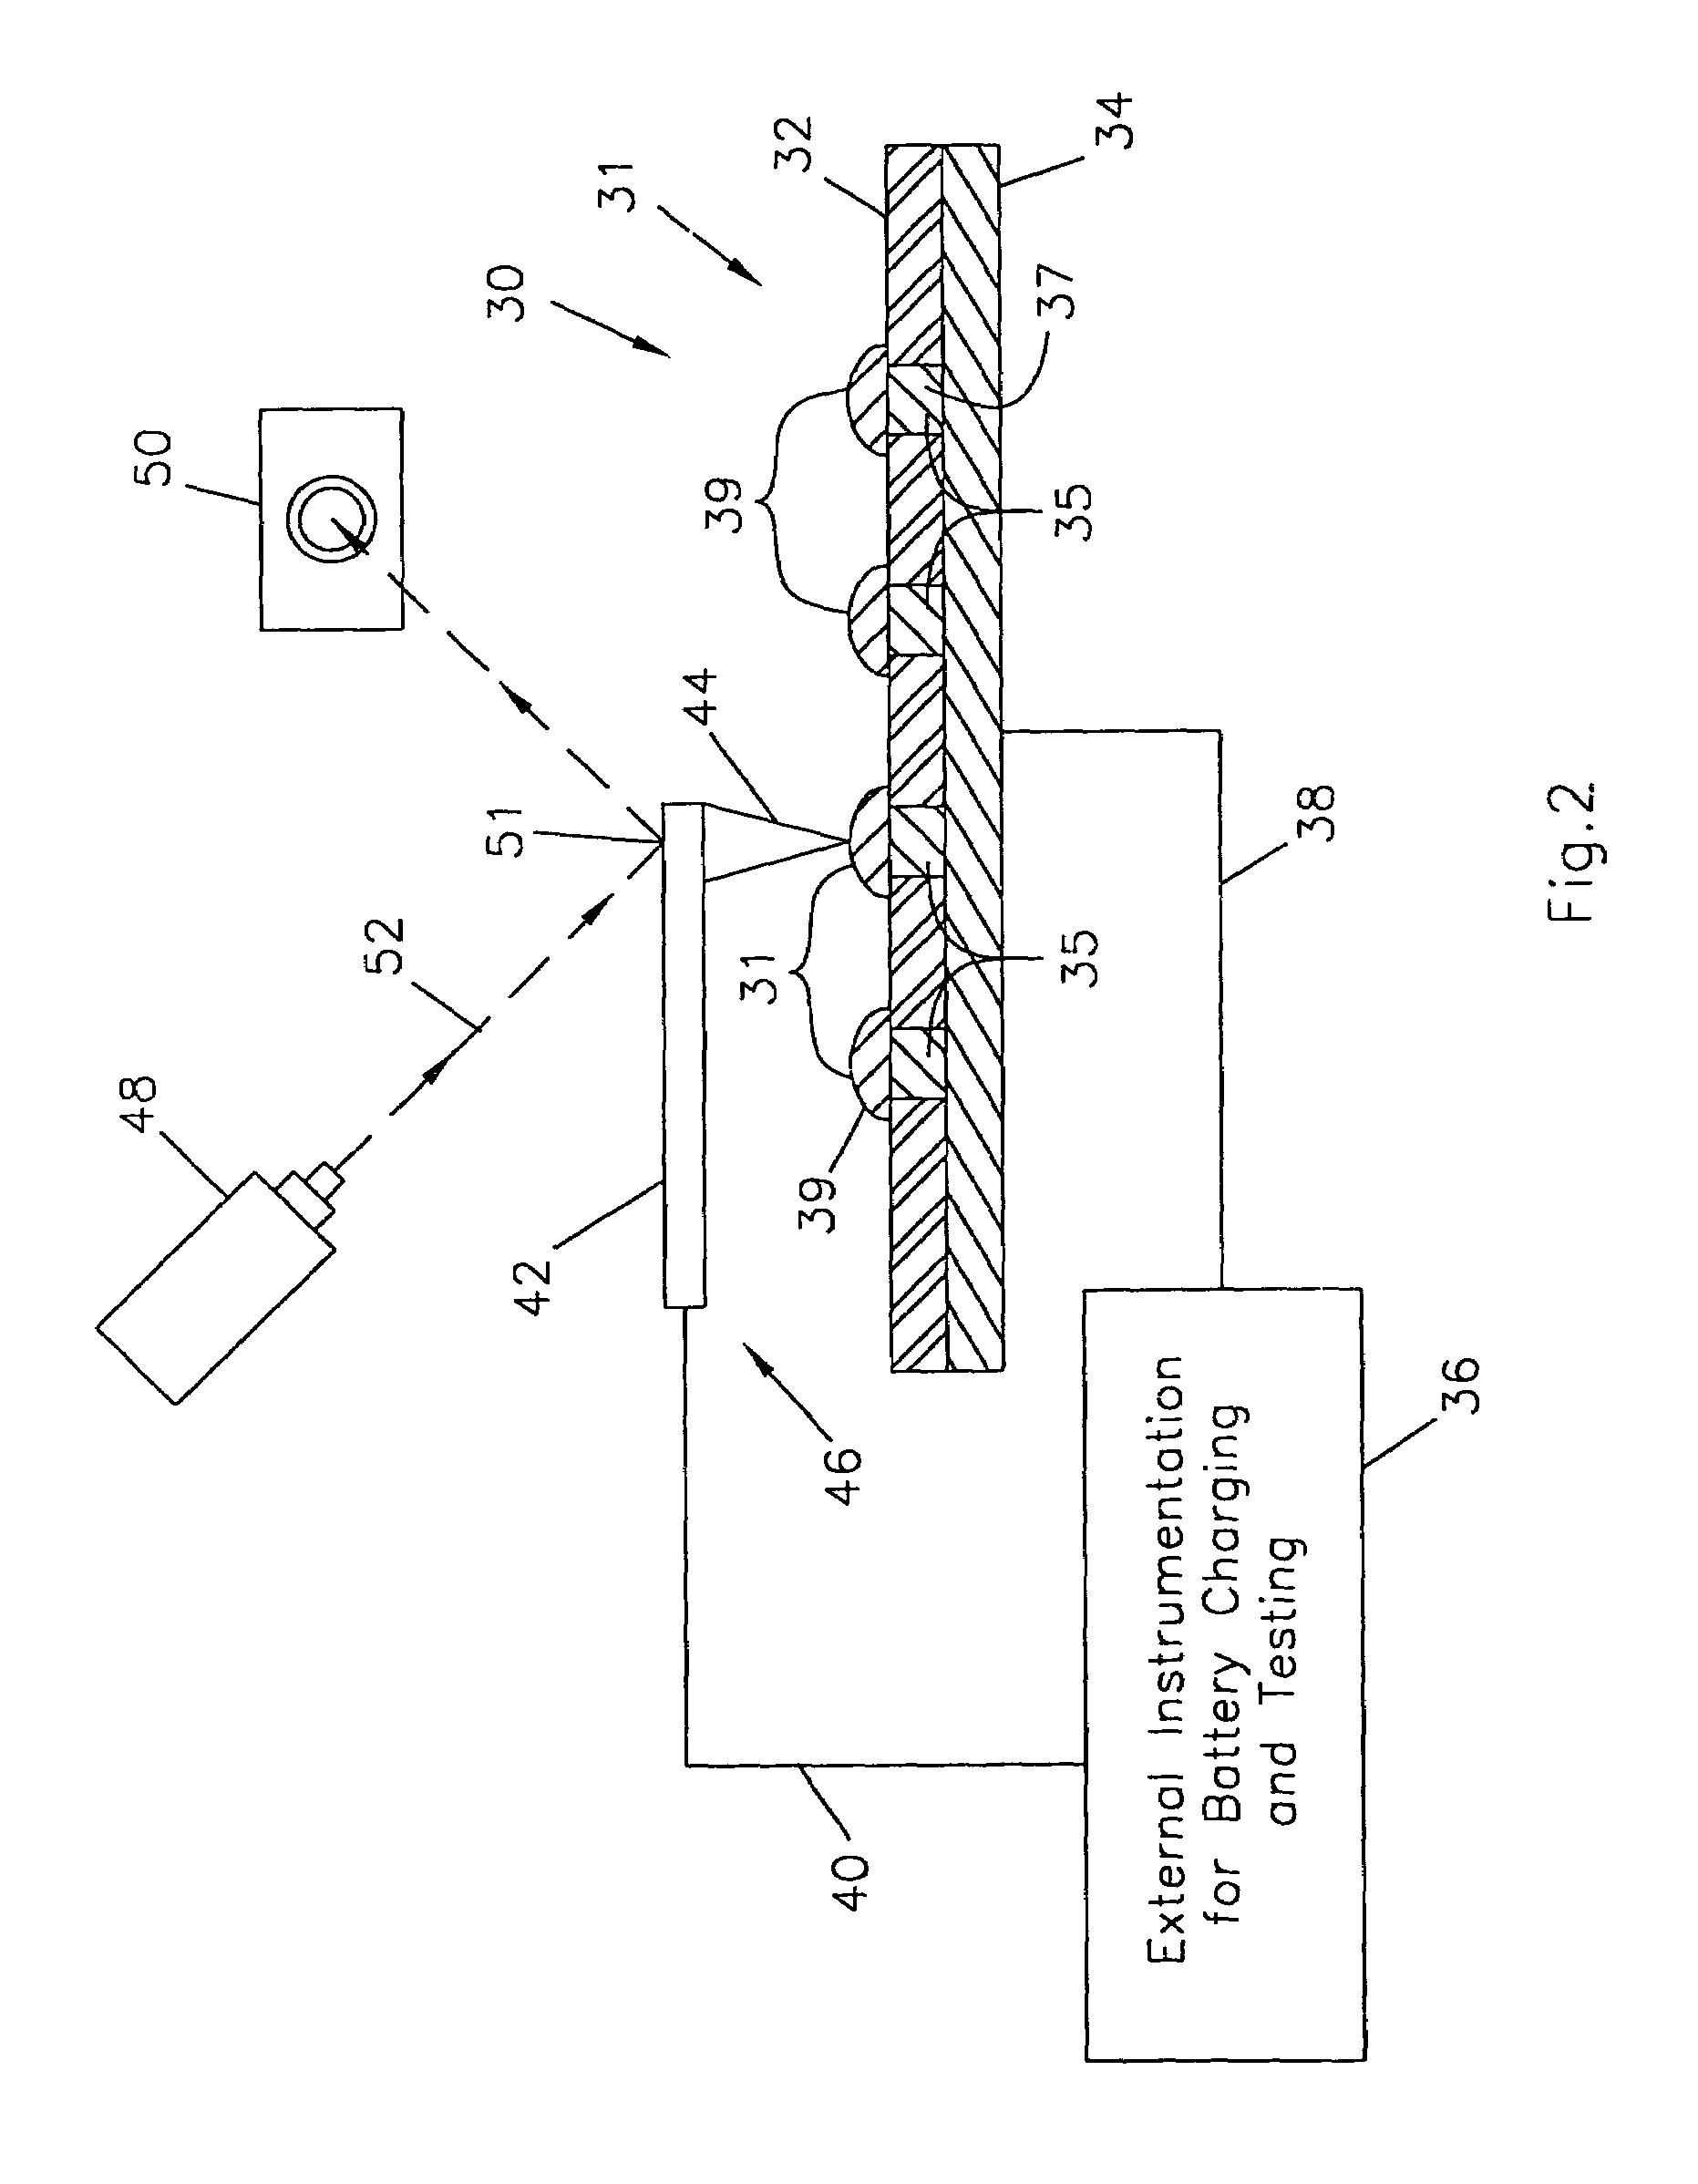 Charged arrays of micro and nanoscale electrochemical cells and batteries for computer and nanodevice memory and power supply